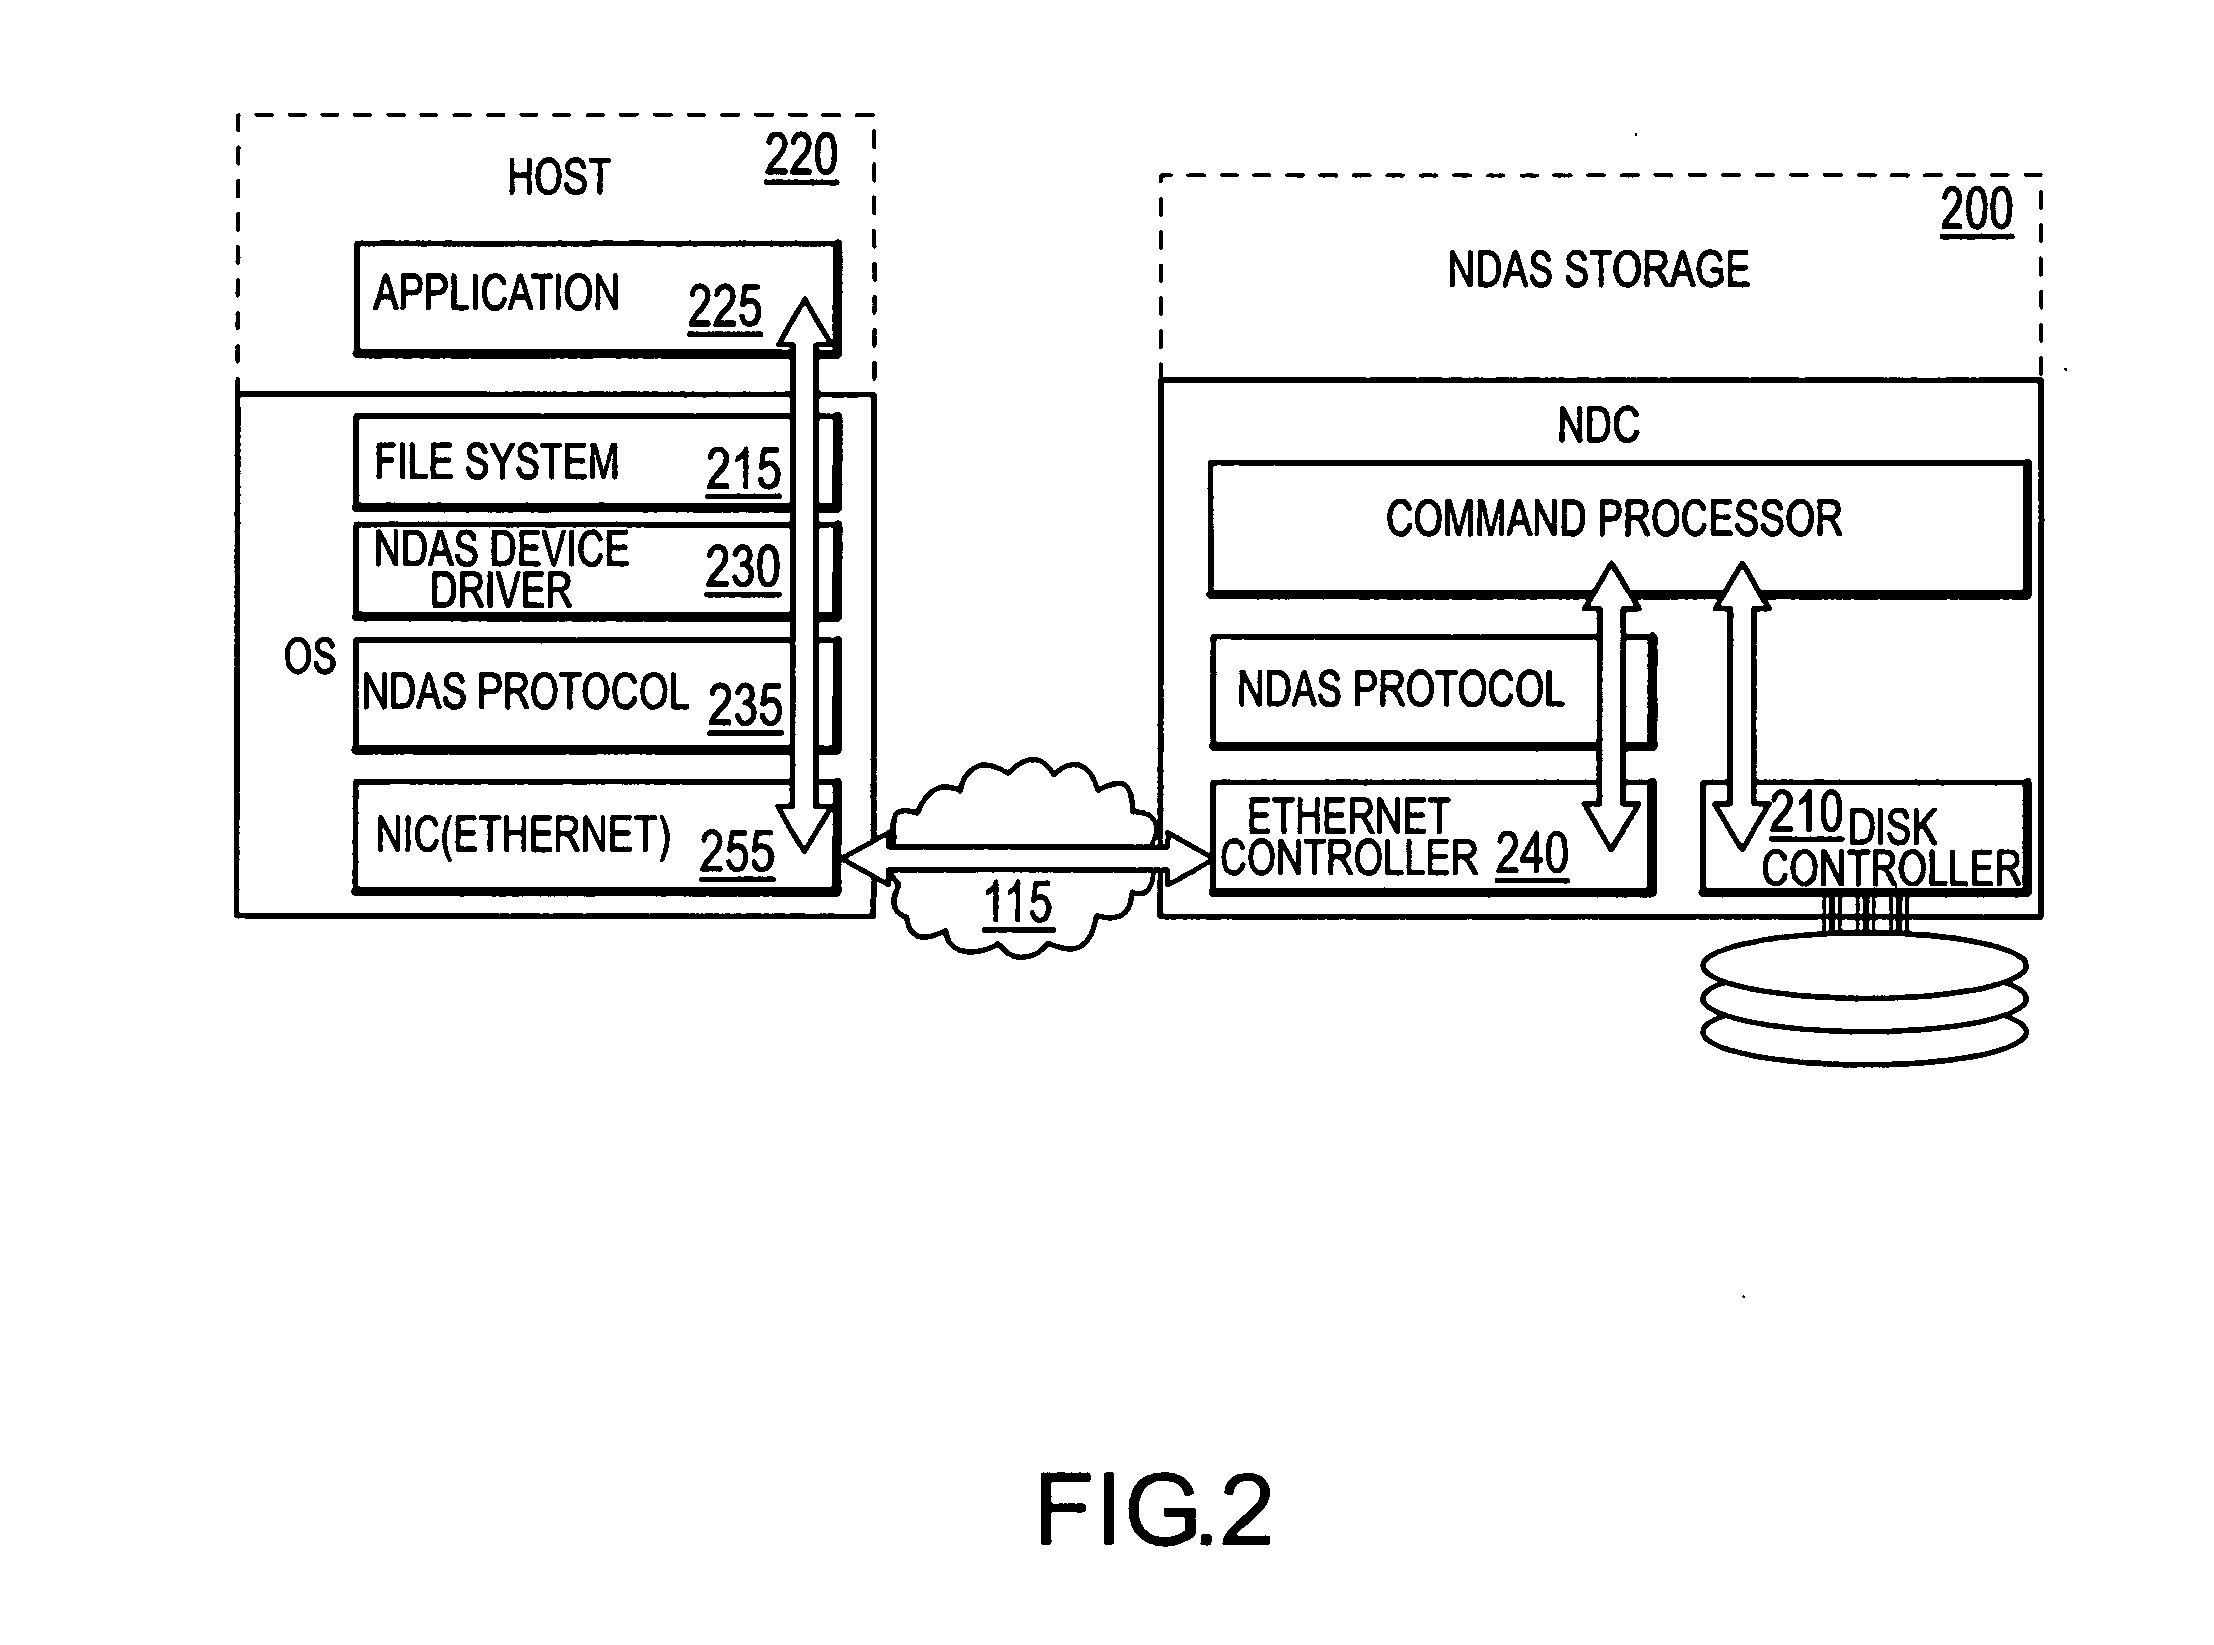 Enhanced network direct attached storage controller